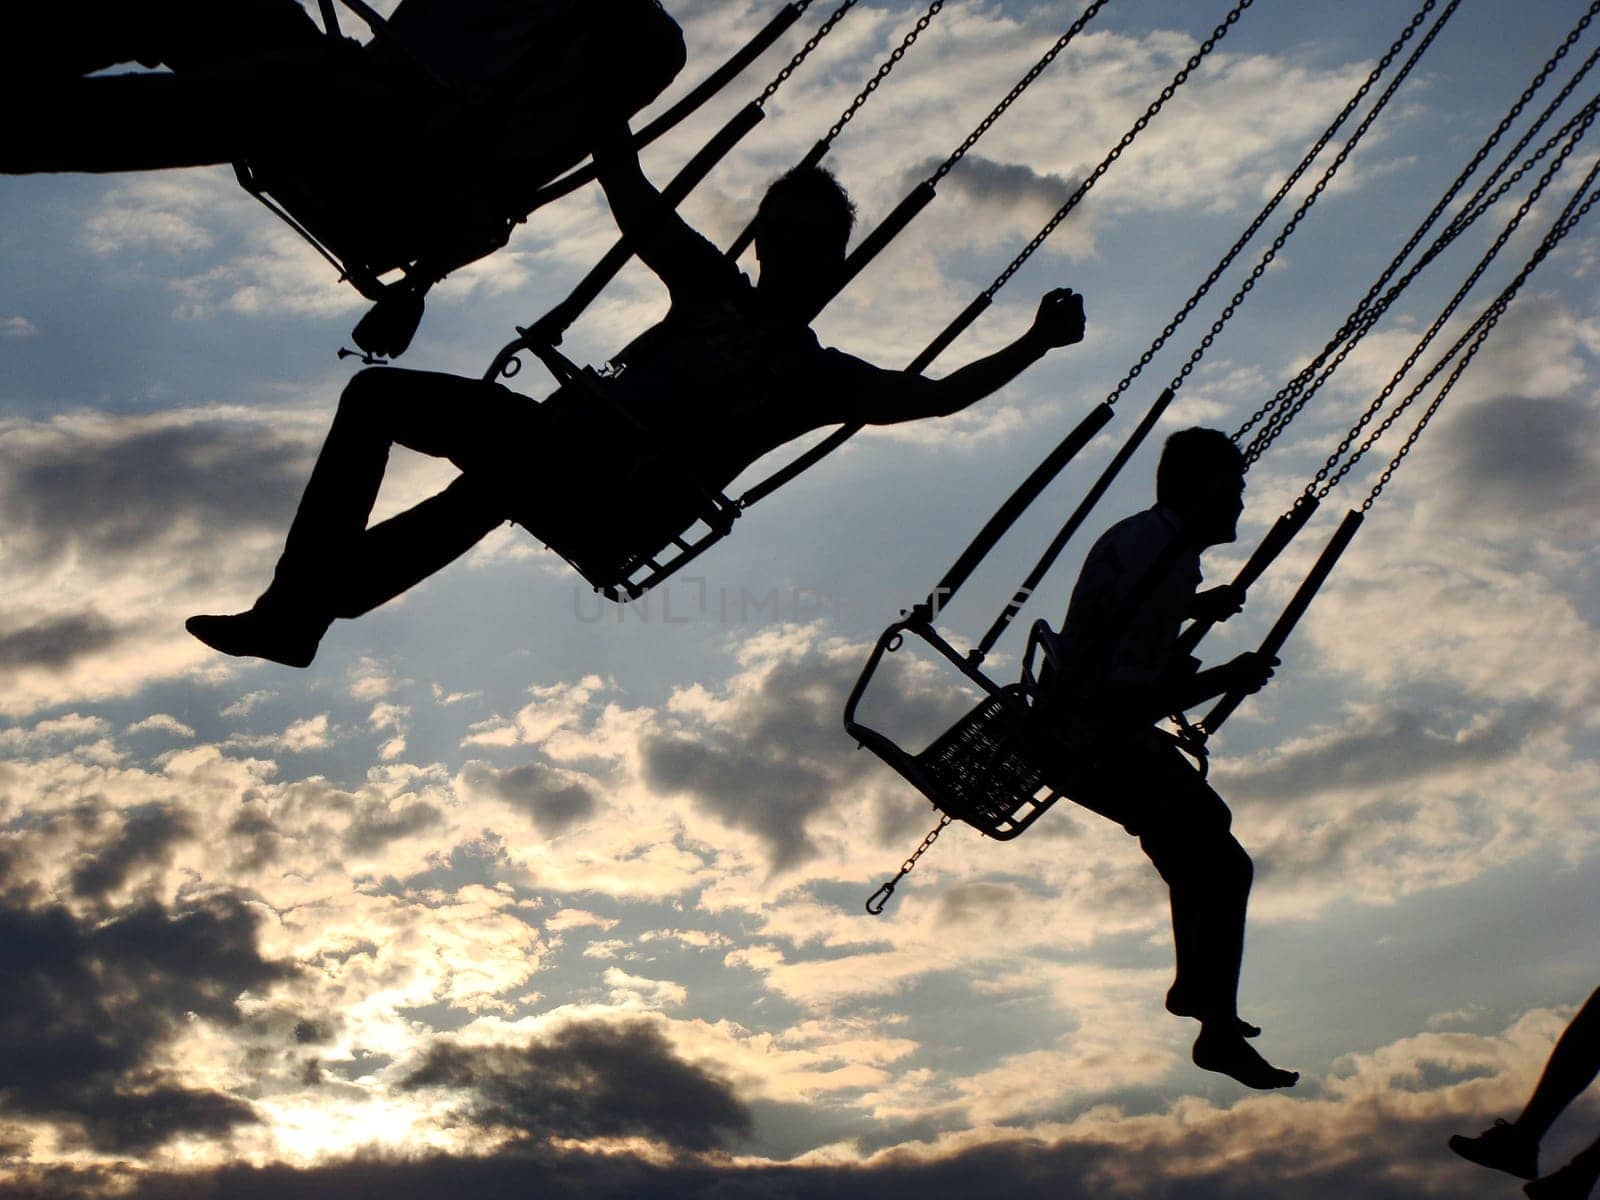 People ride on a carousel. Silhouettes of people riding on a carousel at sunset. High quality photo